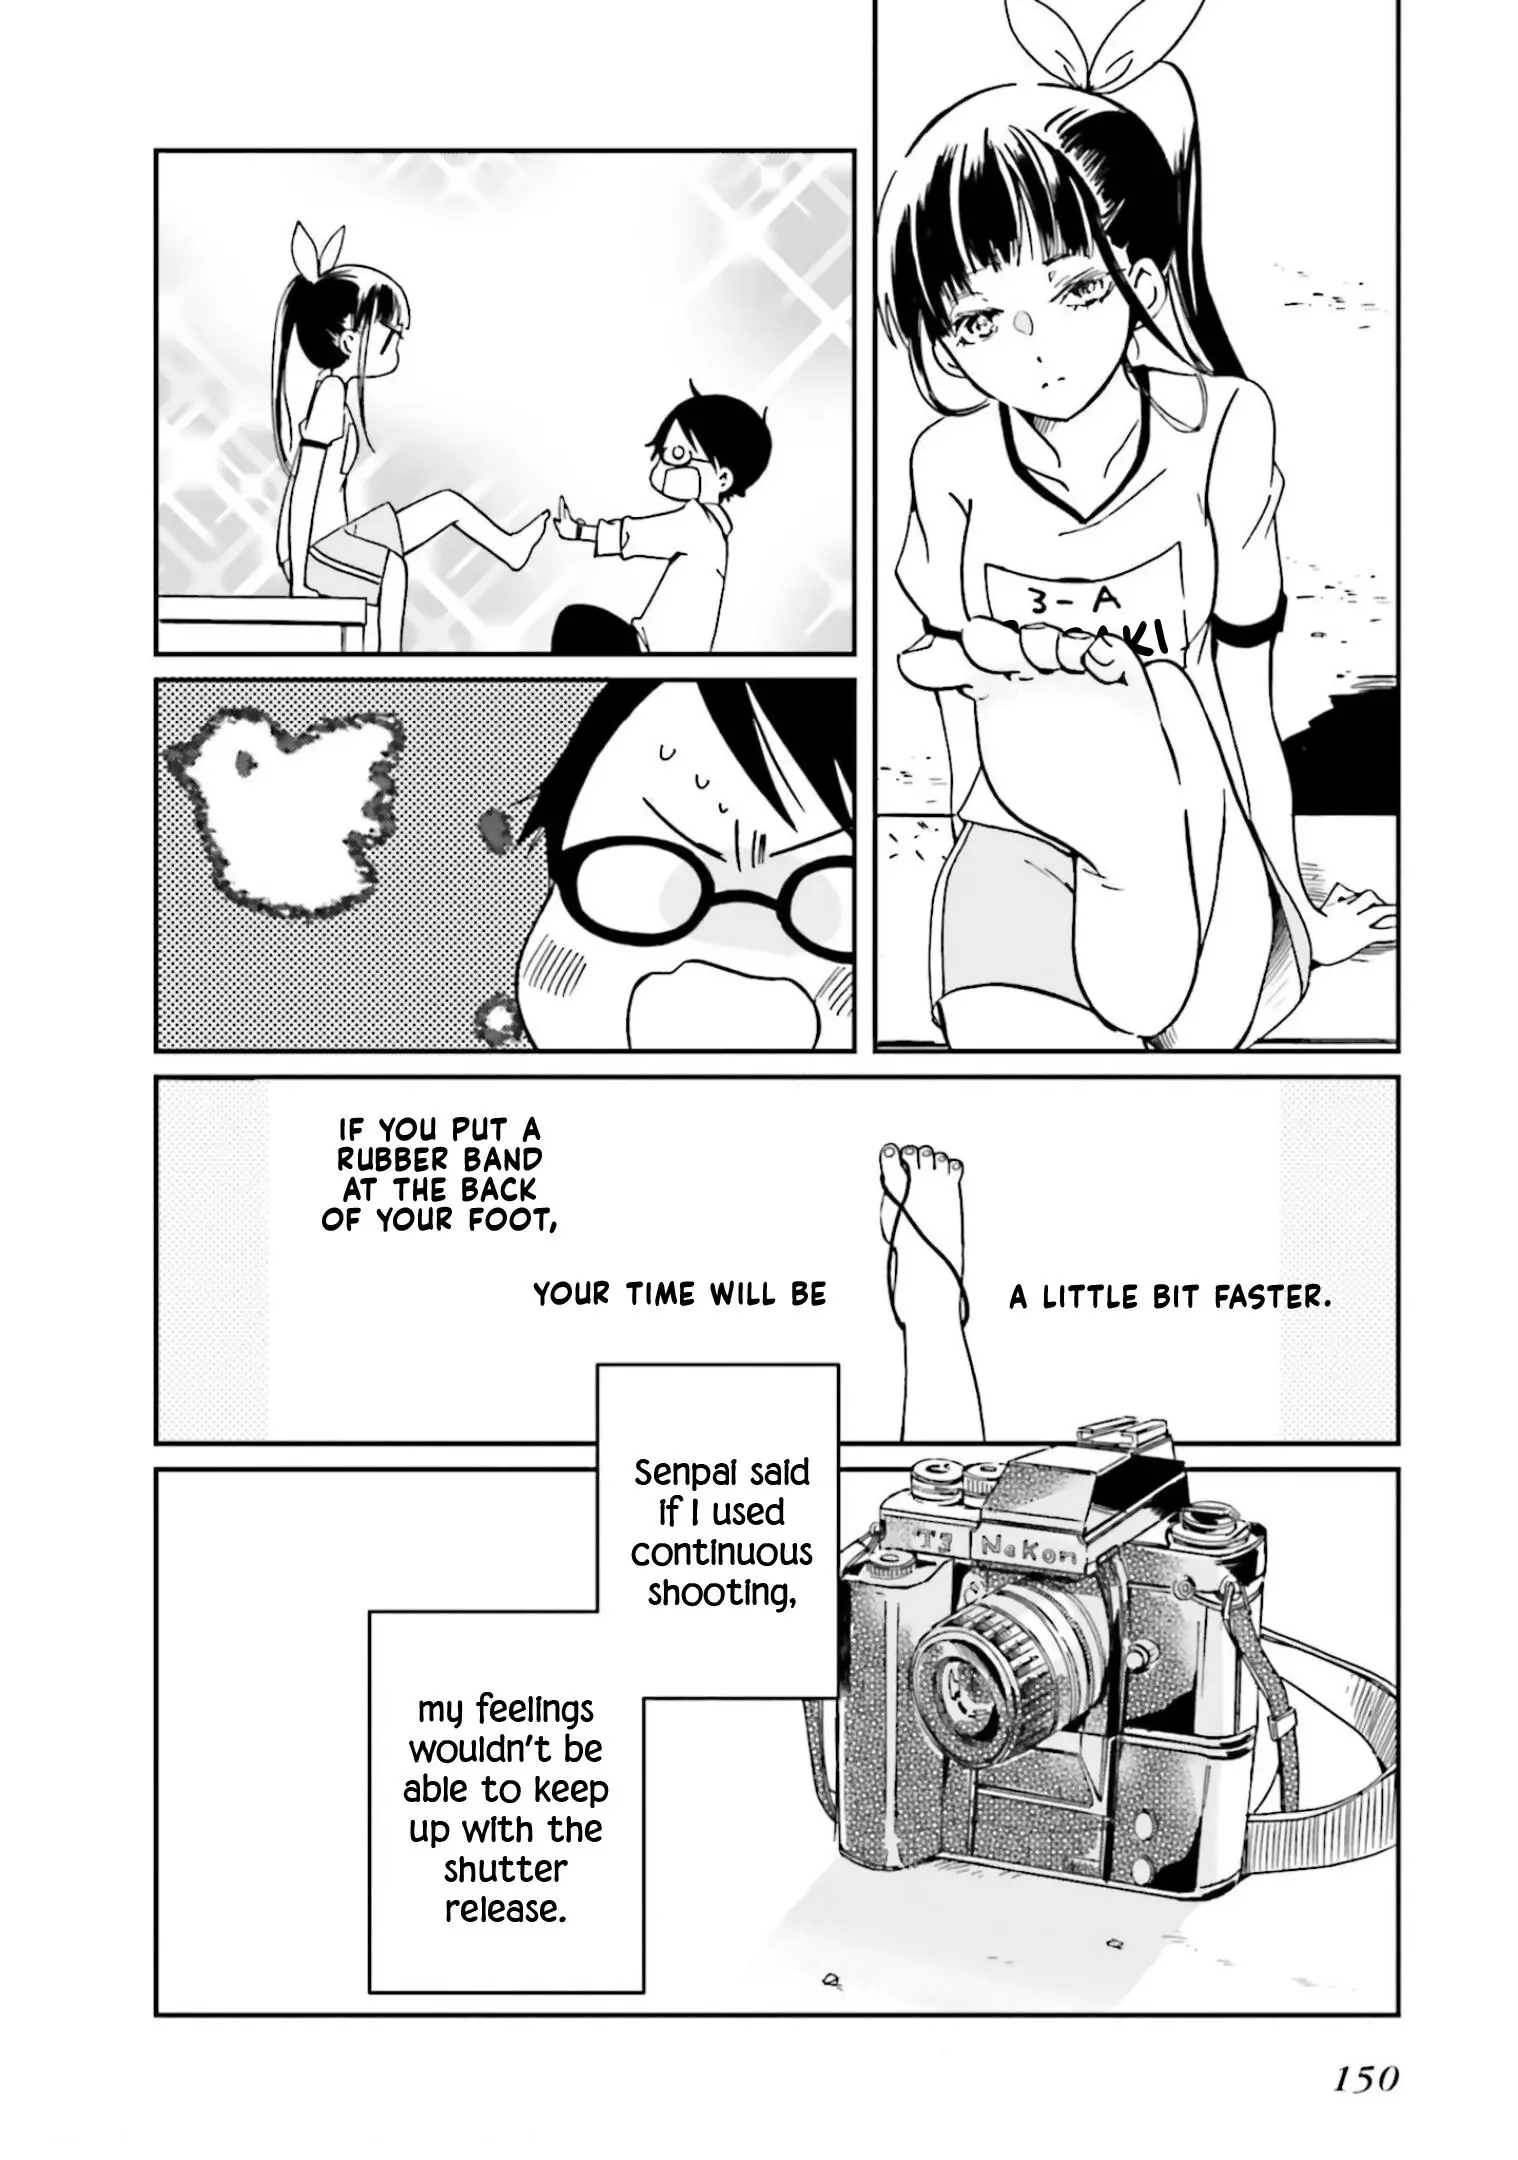 How To Capture Love - 6 page 20-7b4a2ef8